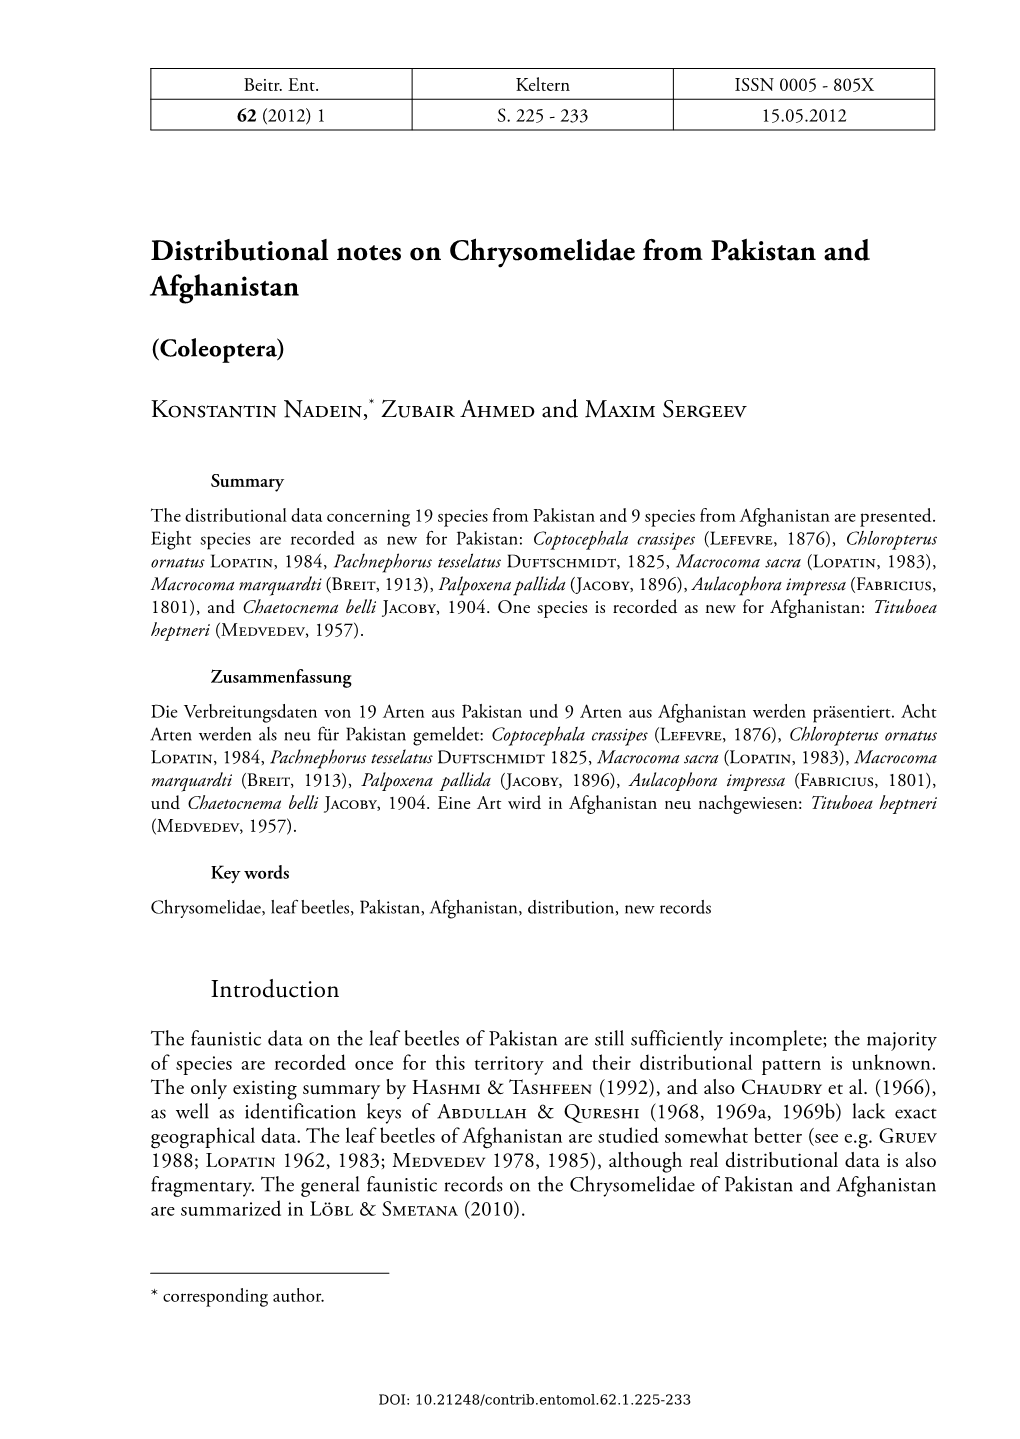 Distributional Notes on Chrysomelidae from Pakistan and Afghanistan